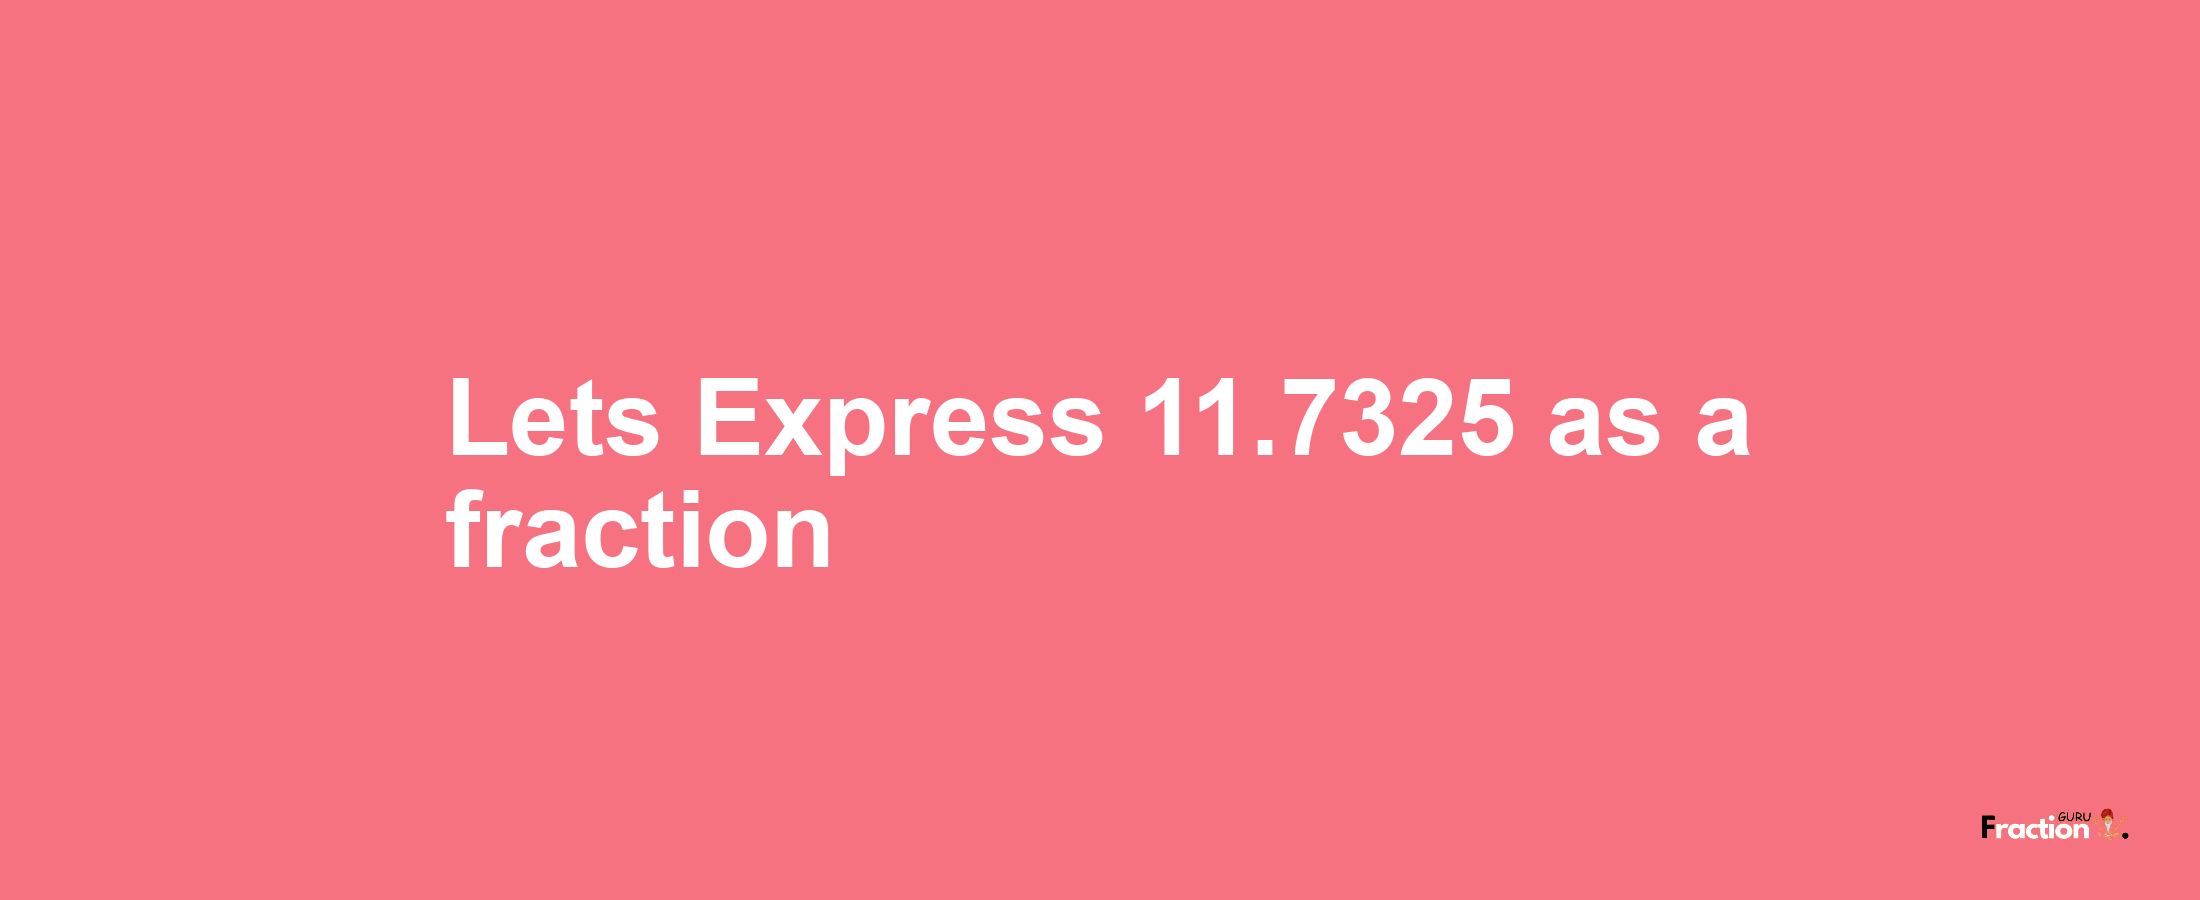 Lets Express 11.7325 as afraction